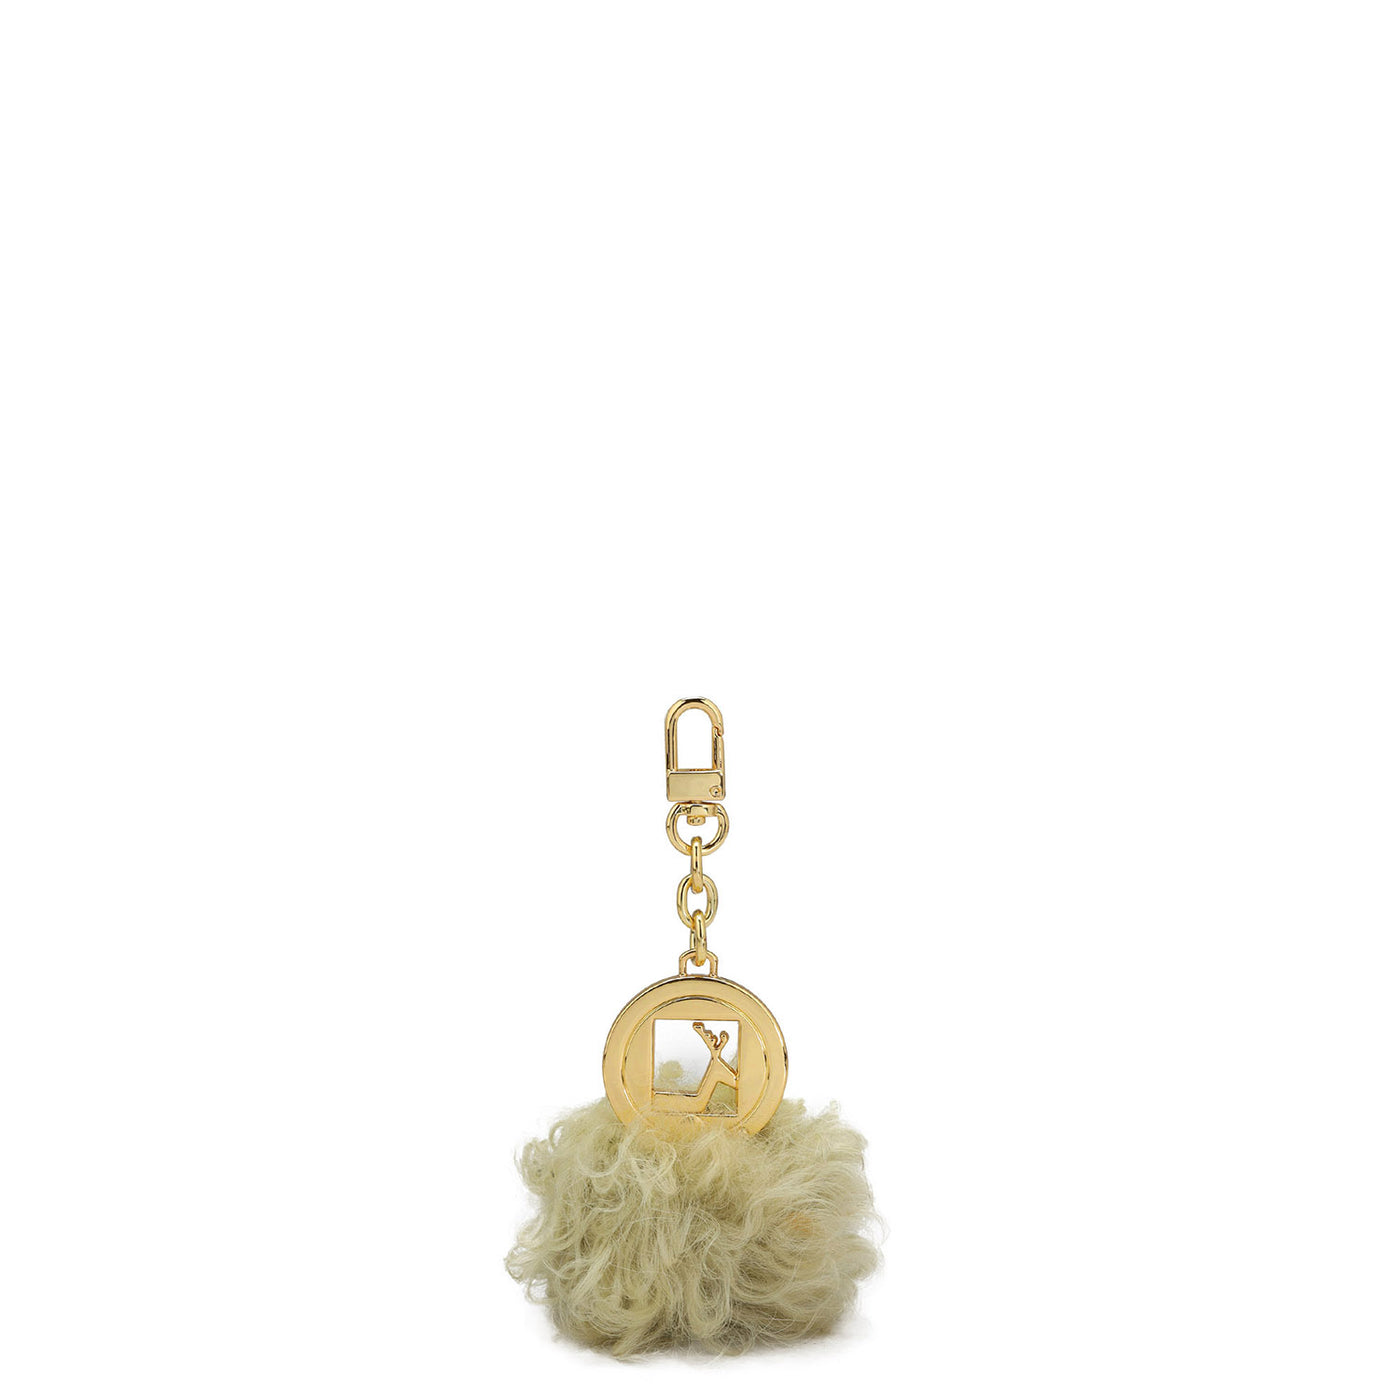 Fur Leather Bag Hanging - Off White